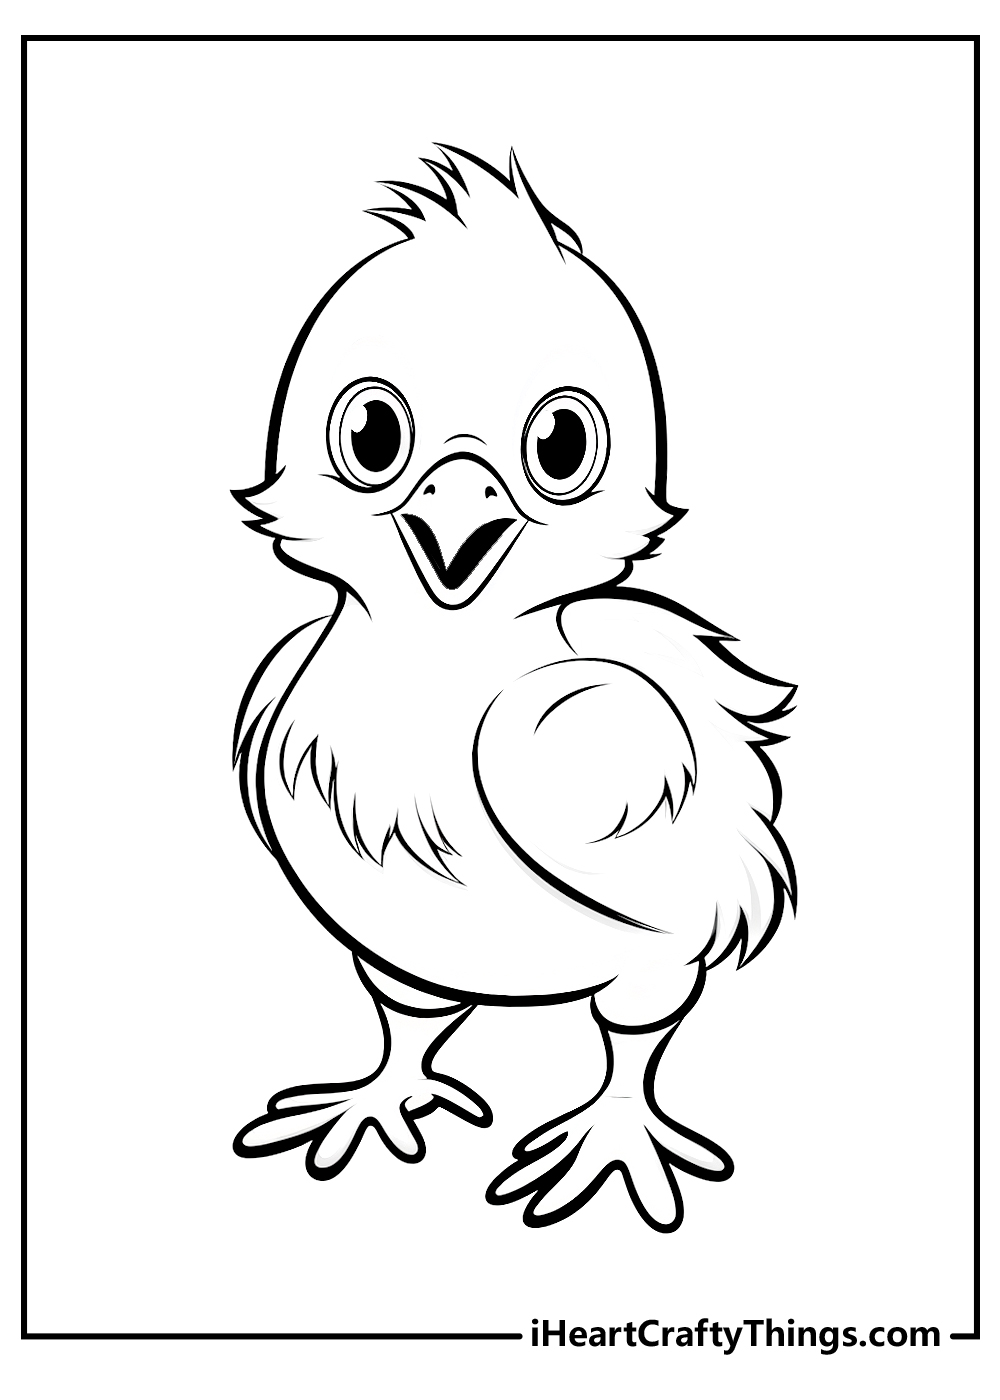 chicken coloring sheet free download